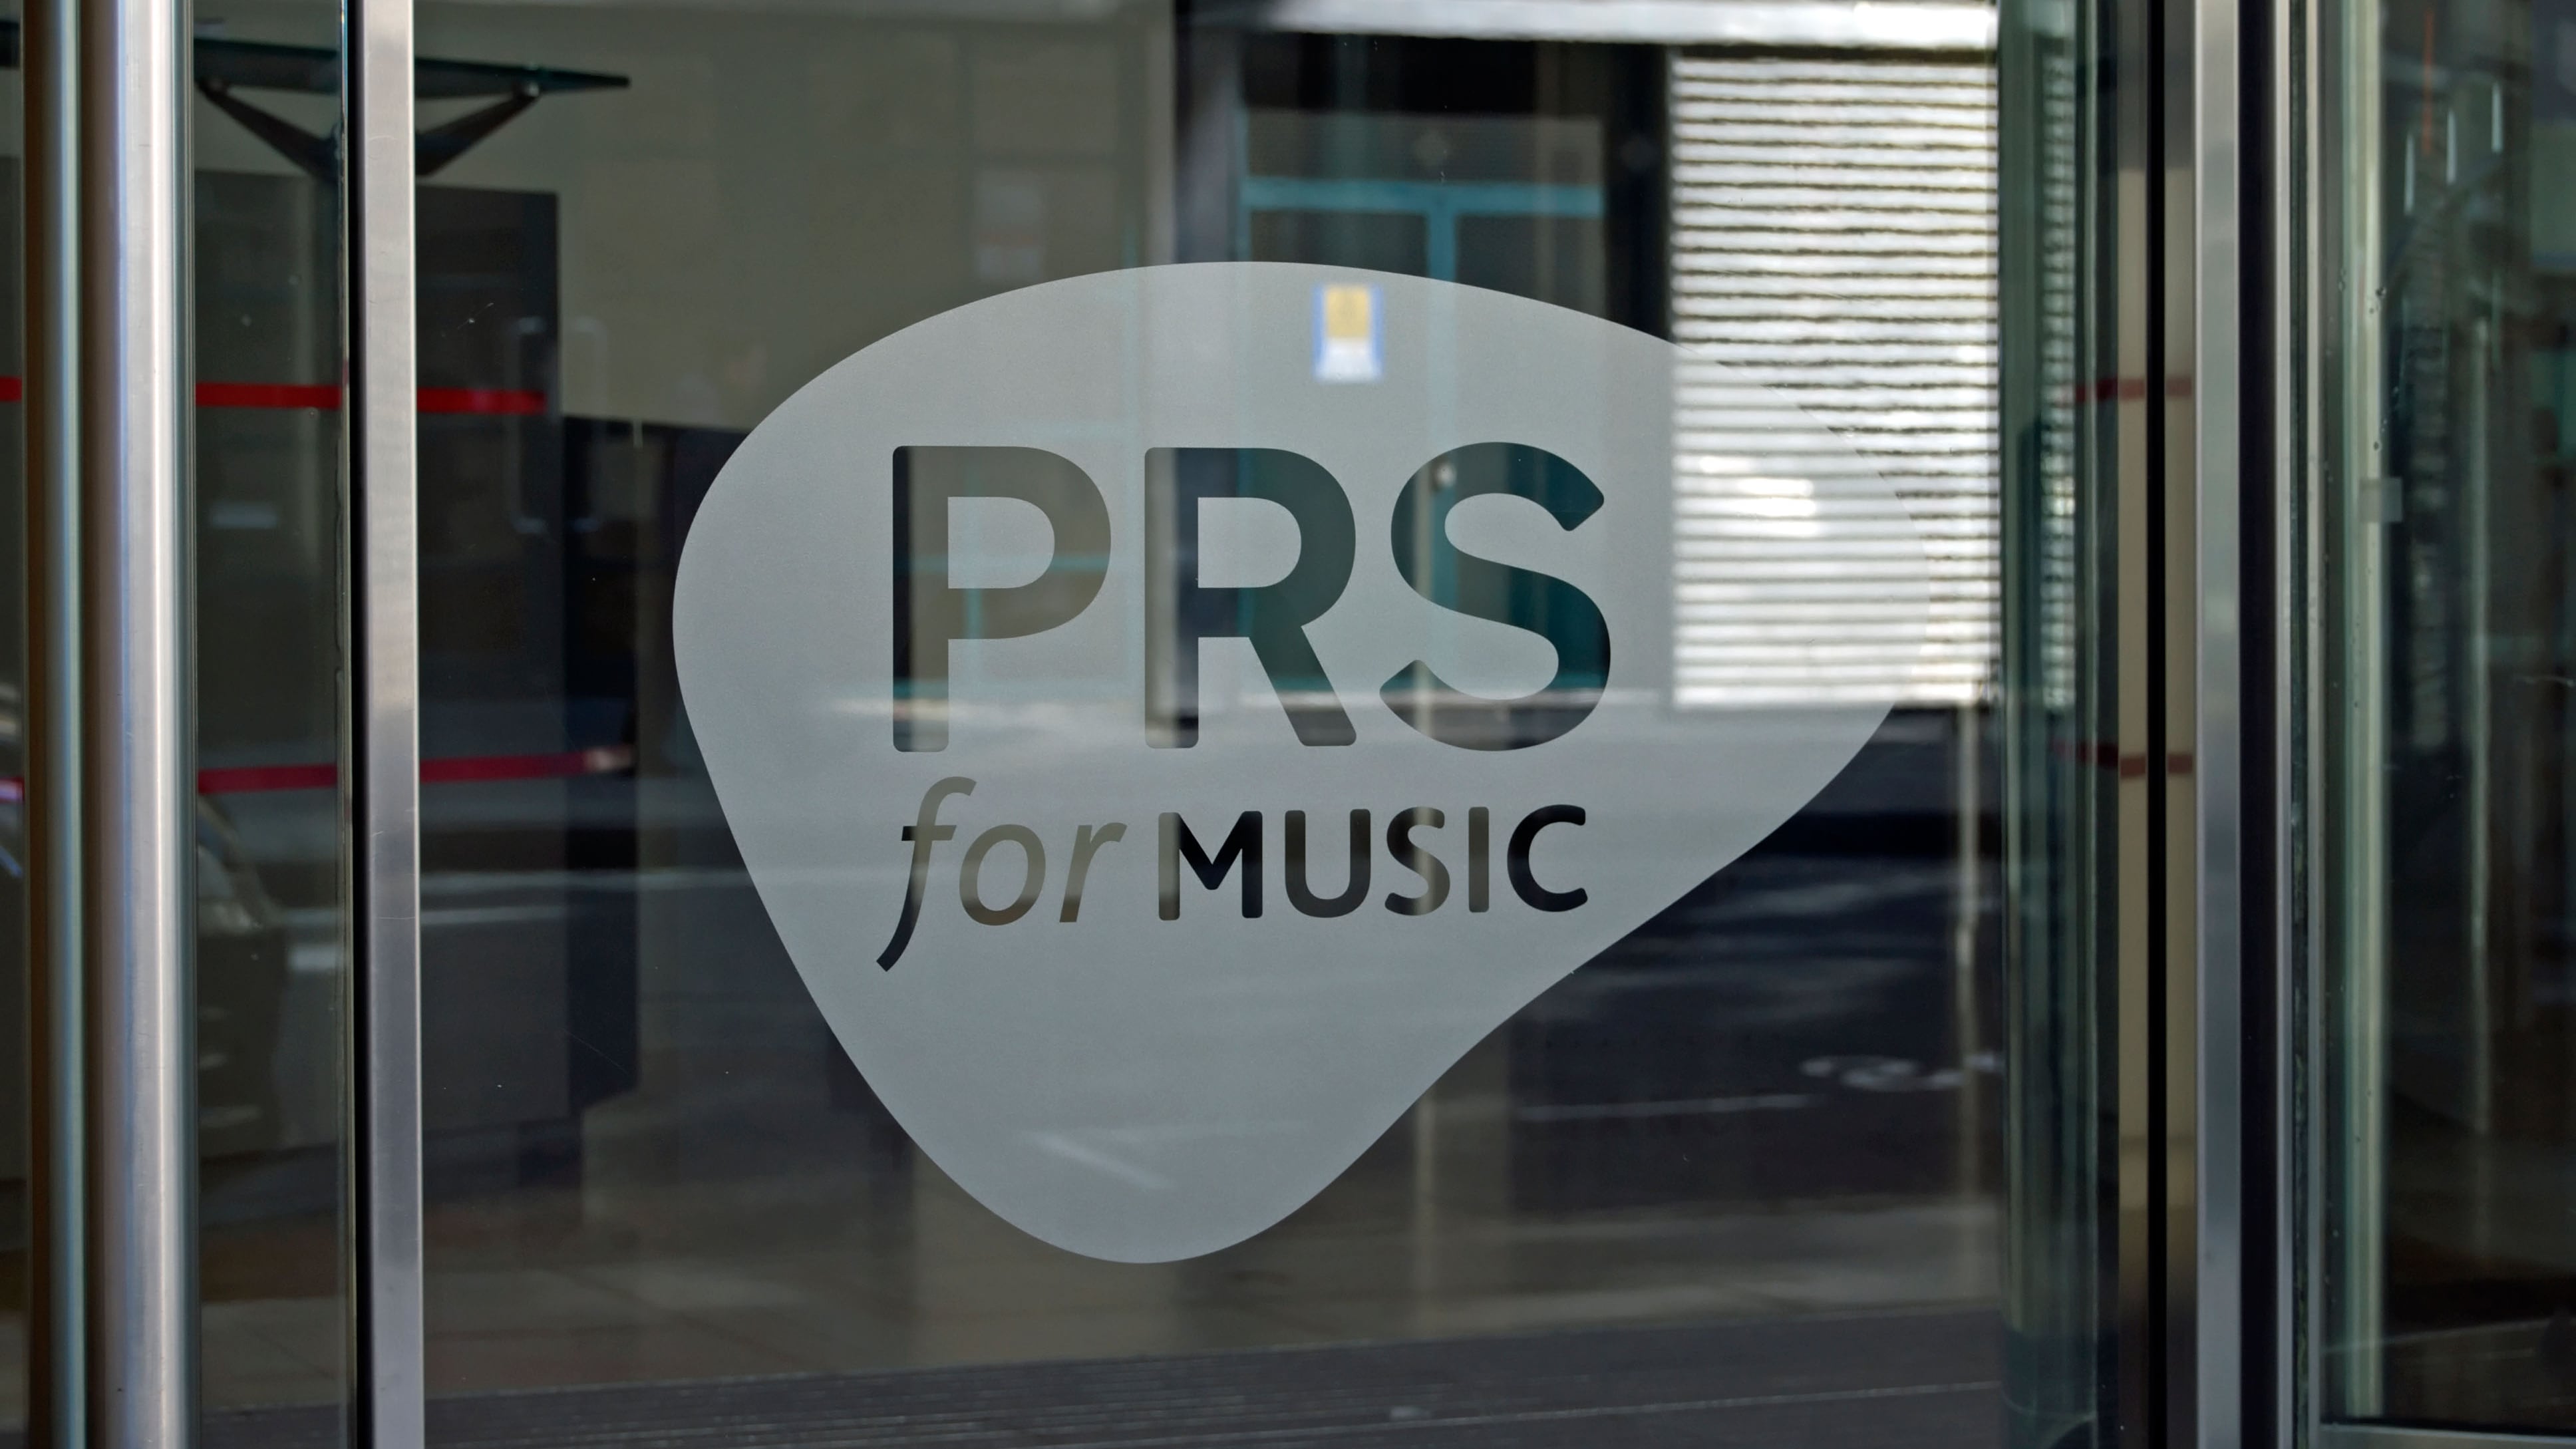 PRS for Music rejected the allegations (Mick Sinclair/Alamy)